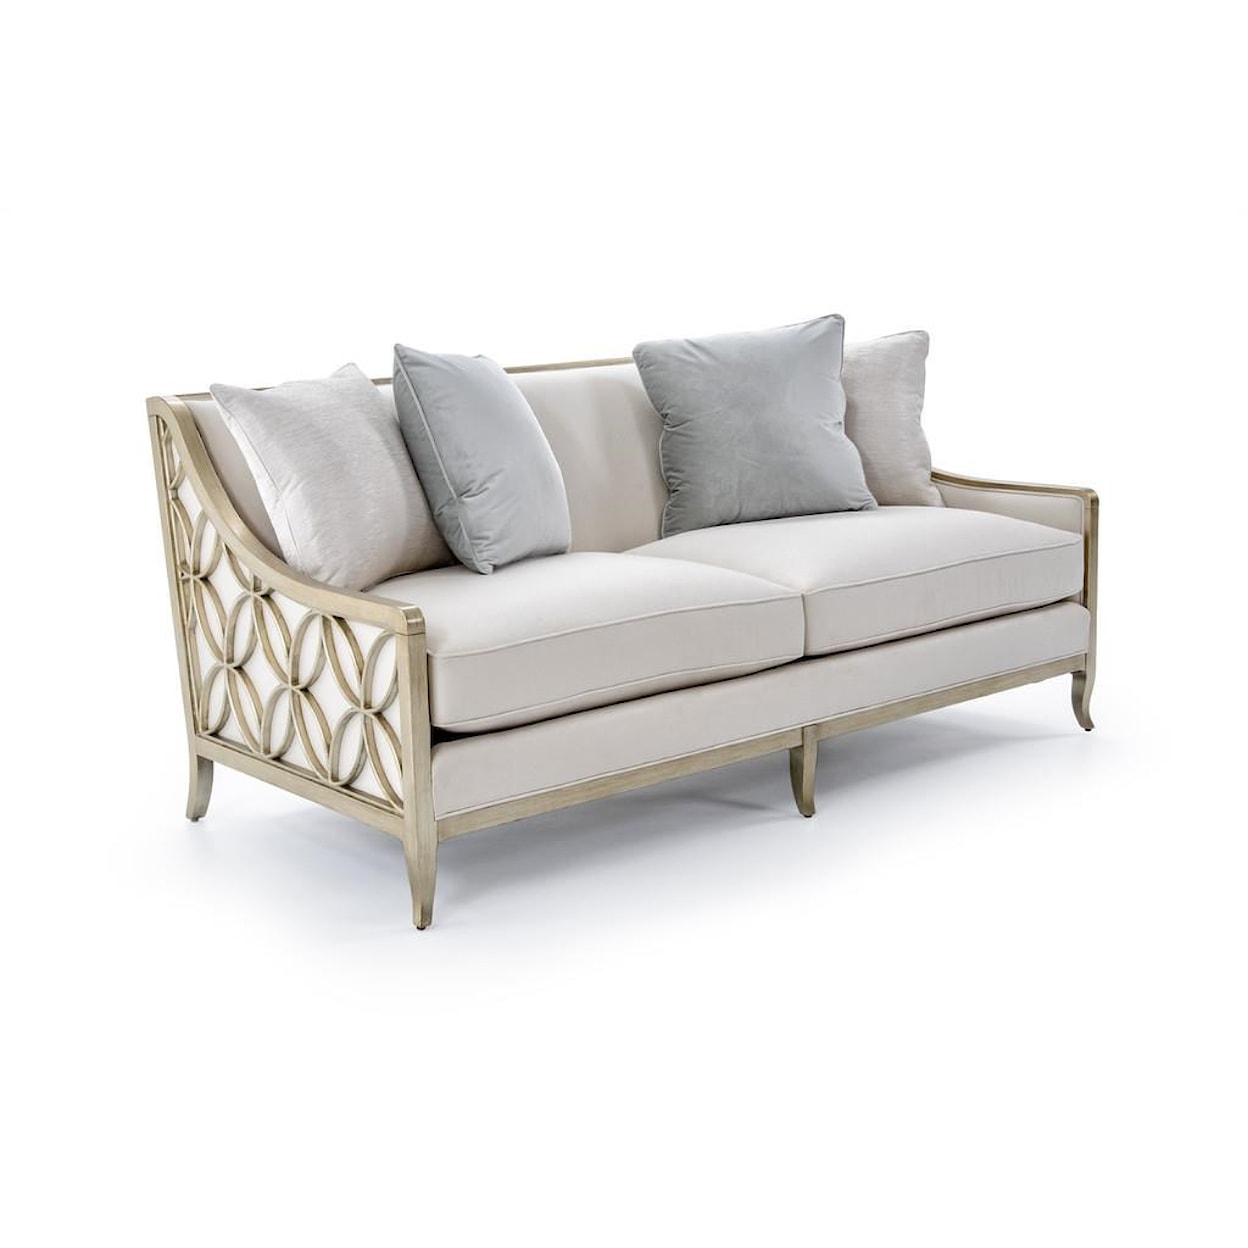 Caracole Caracole Upholstery Social Butterfly Sofa with Exposed Wood